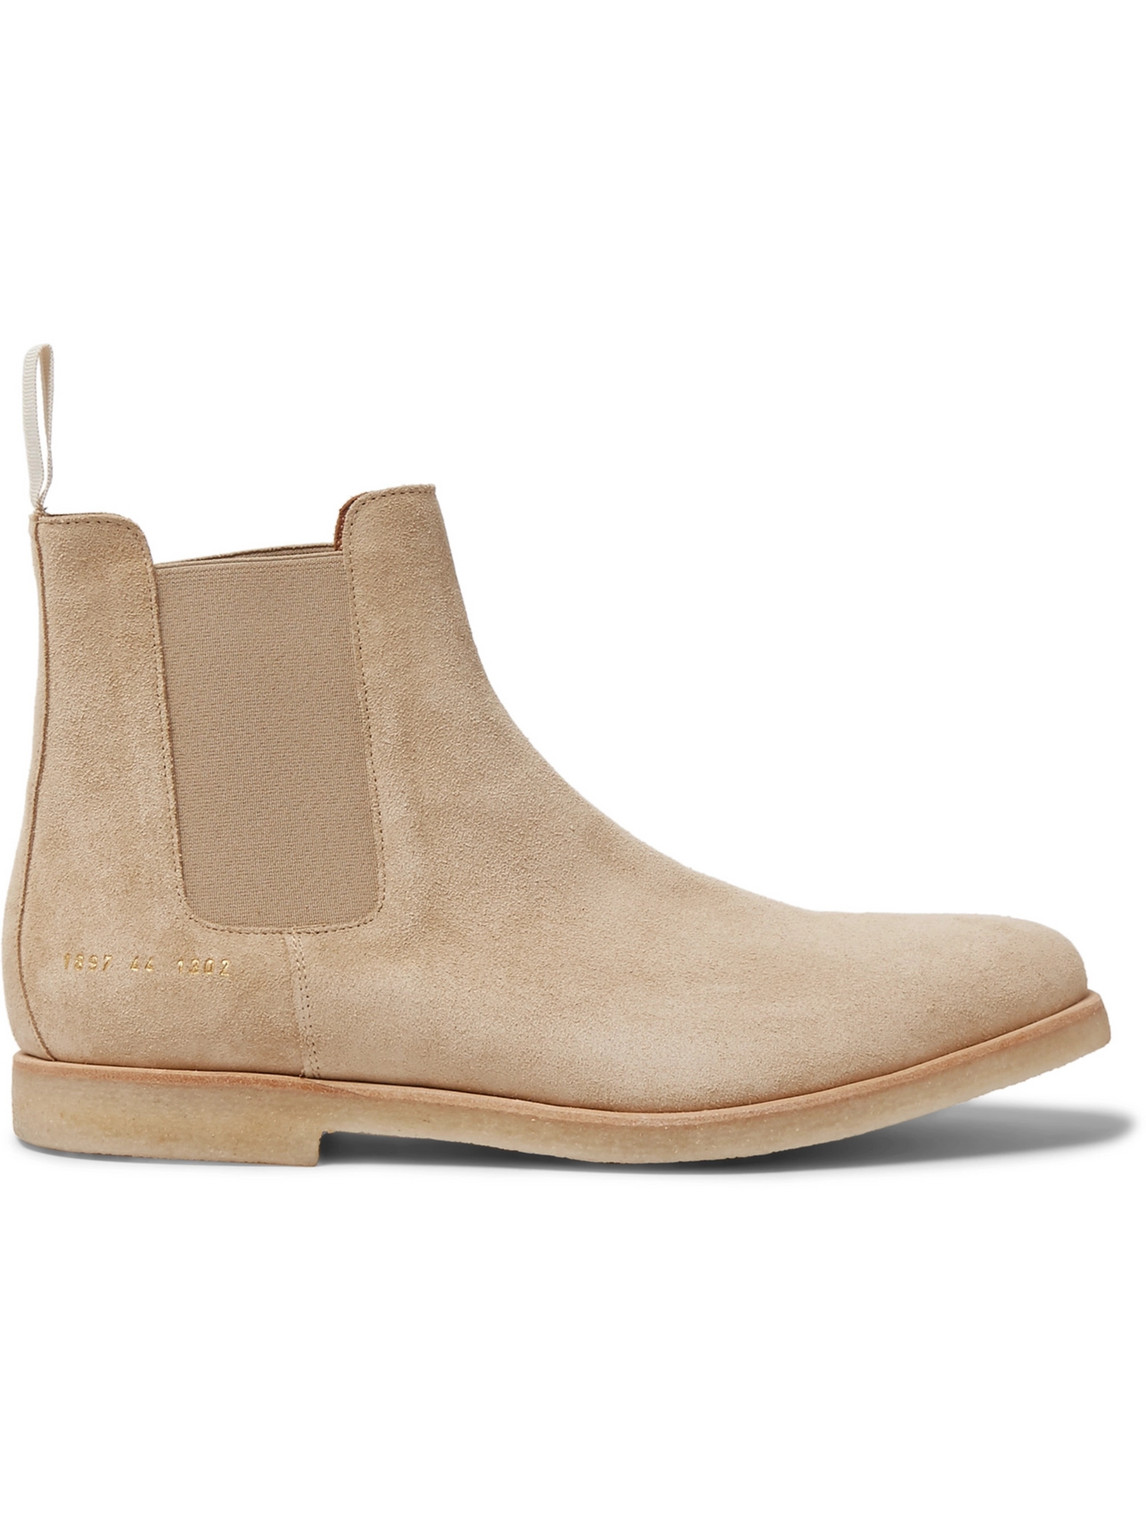 Common Projects Beige Suede Chelsea Boots In Tan | ModeSens